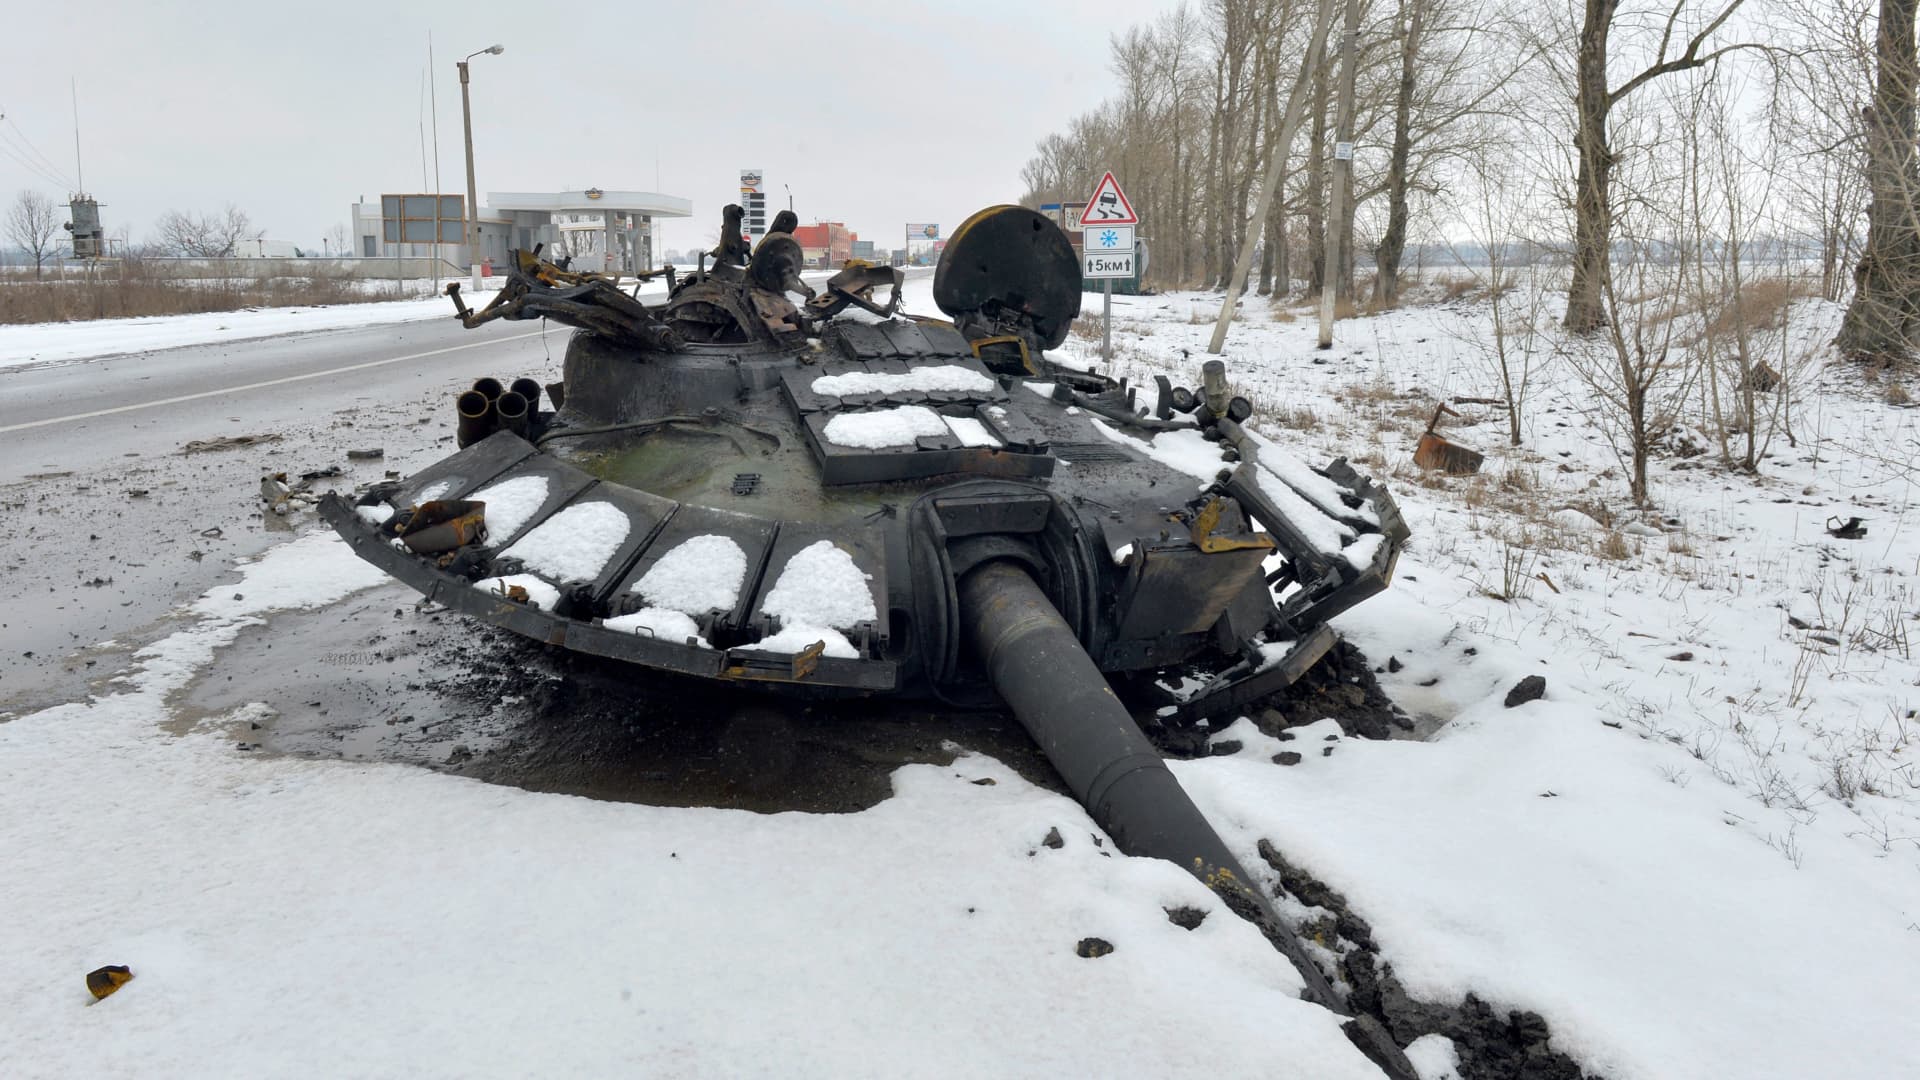 A fragment of a destroyed Russian tank is seen on the roadside on the outskirts of Kharkiv on February 26, 2022, following the Russian invasion of Ukraine.